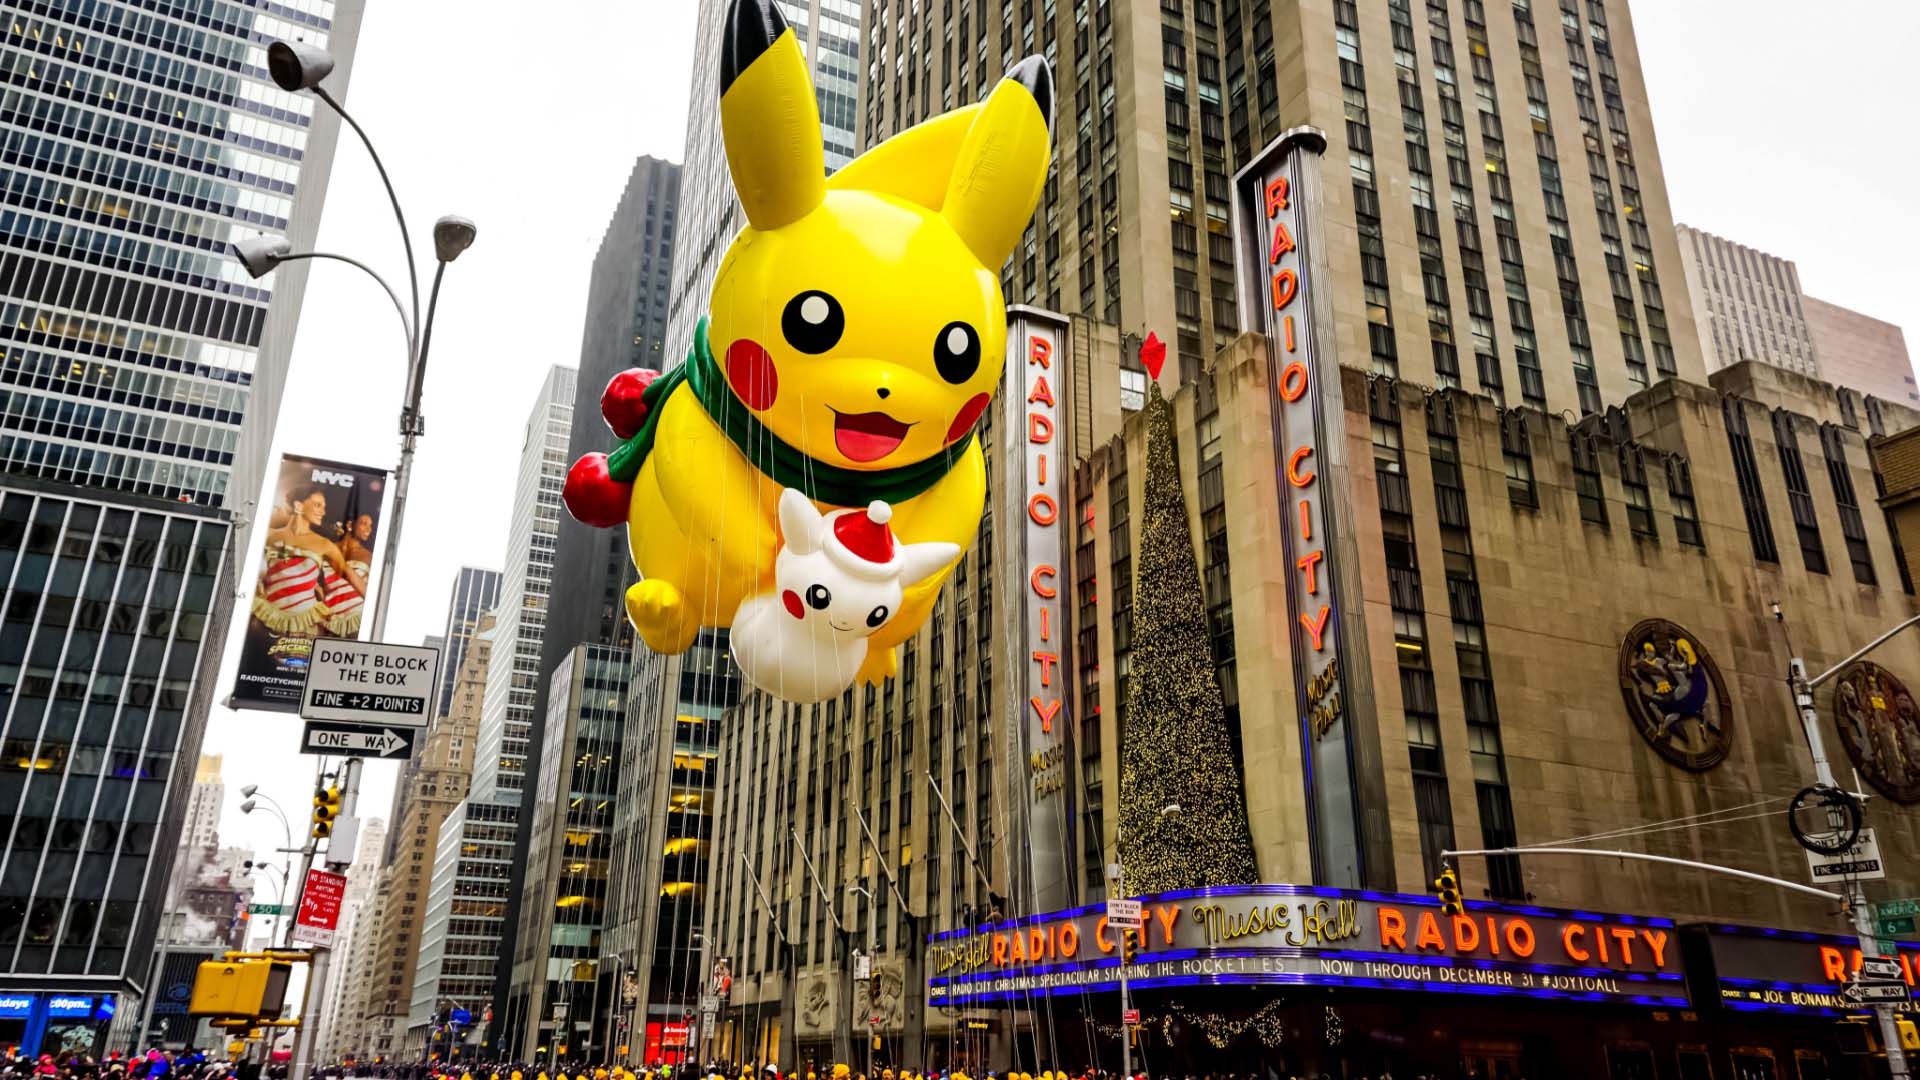 Pikachu balloon in the Macy's Parade